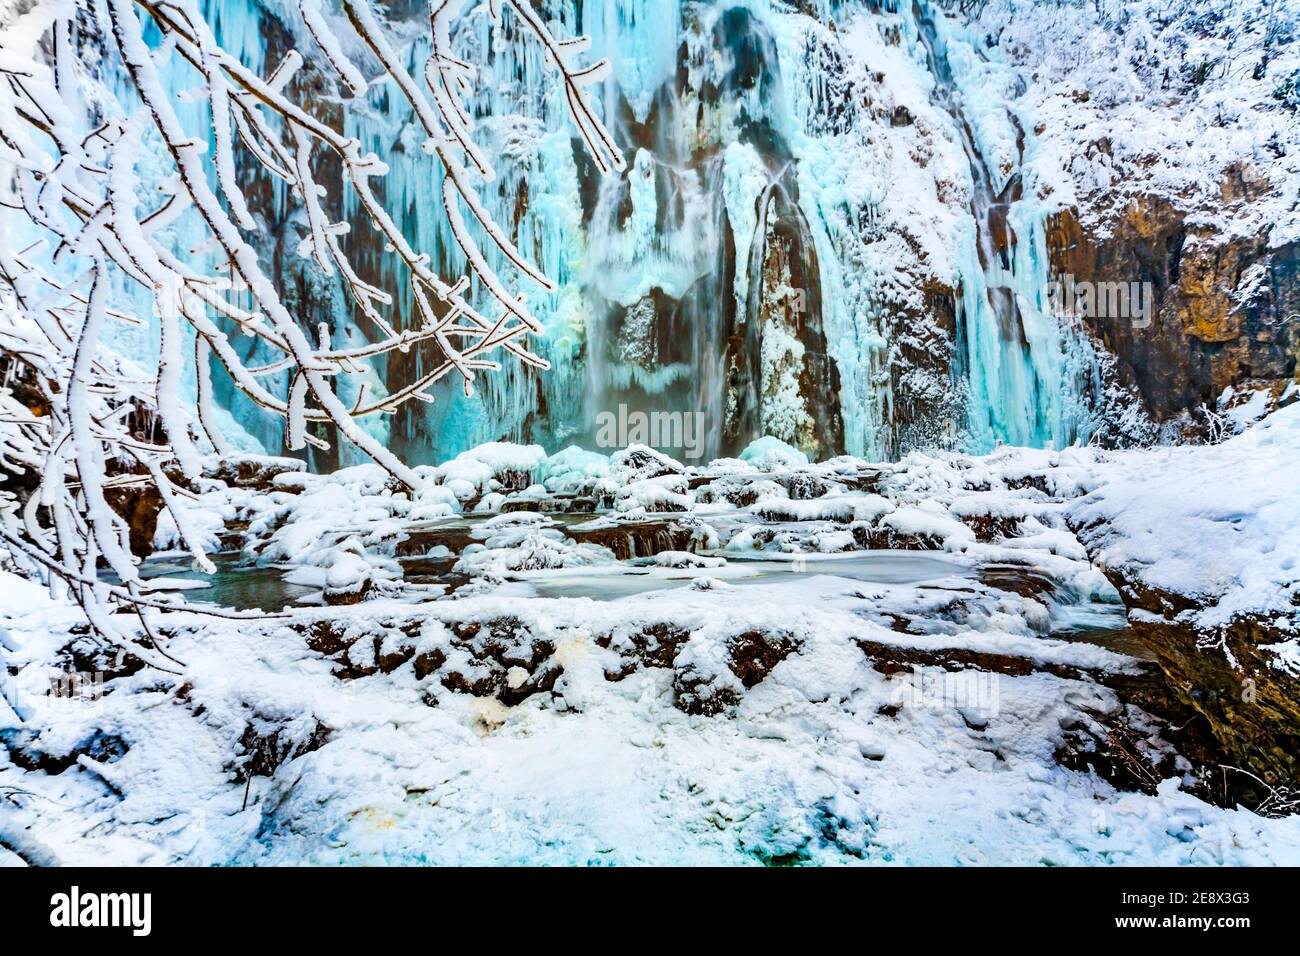 National park Plitvice lakes in Croatia Europe in Winter under covered cover snow and ice famous landmark place Veliki slap closeup close-up Stock Photo